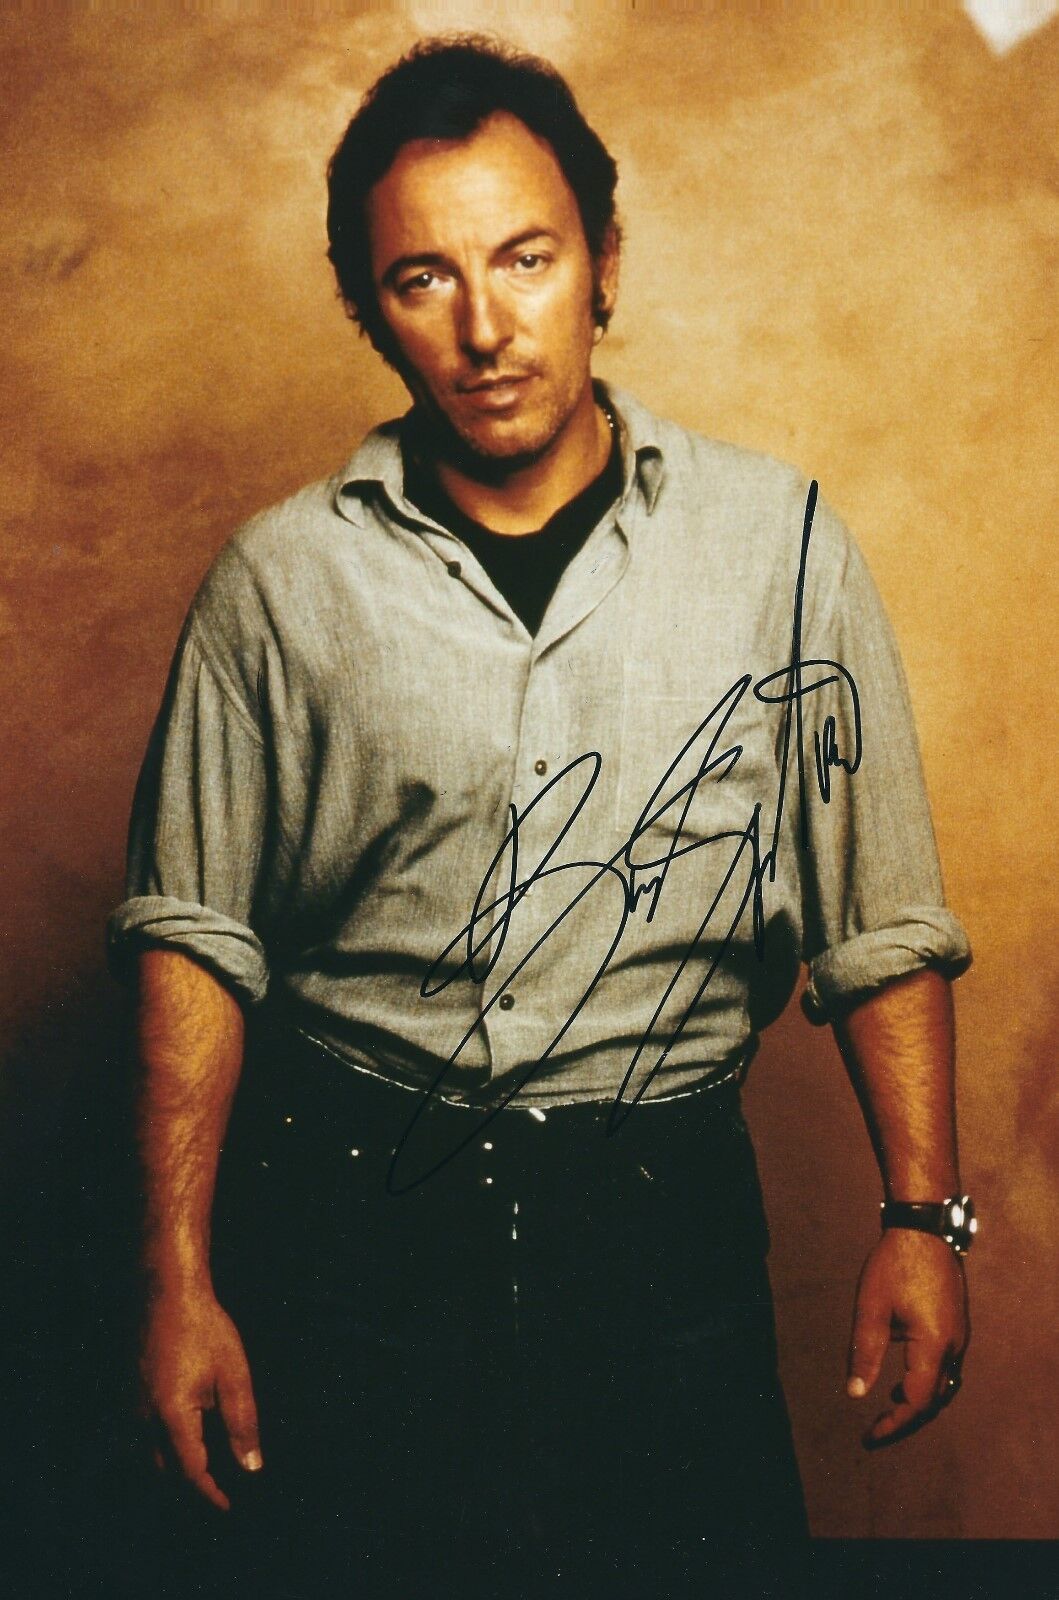 BRUCE SPRINGSTEEN SIGNED 12x8 Photo Poster painting - UACC & AFTAL RD AUTOGRAPH